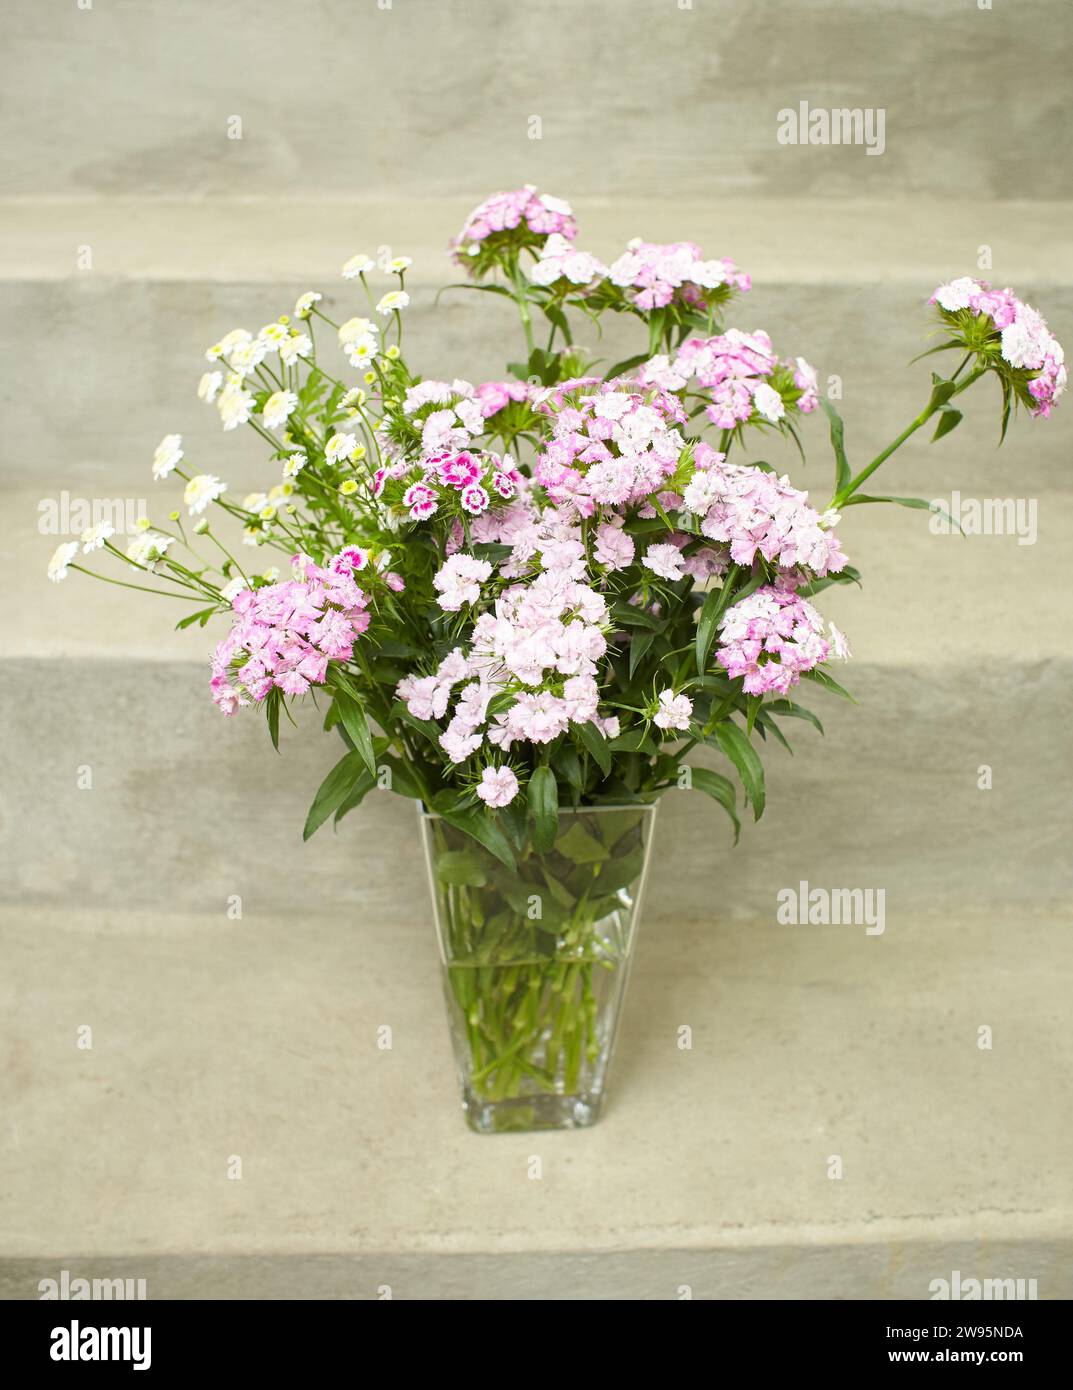 Bunch o white and pink flowers of Dianthus, Carnation in the vase. Stock Photo